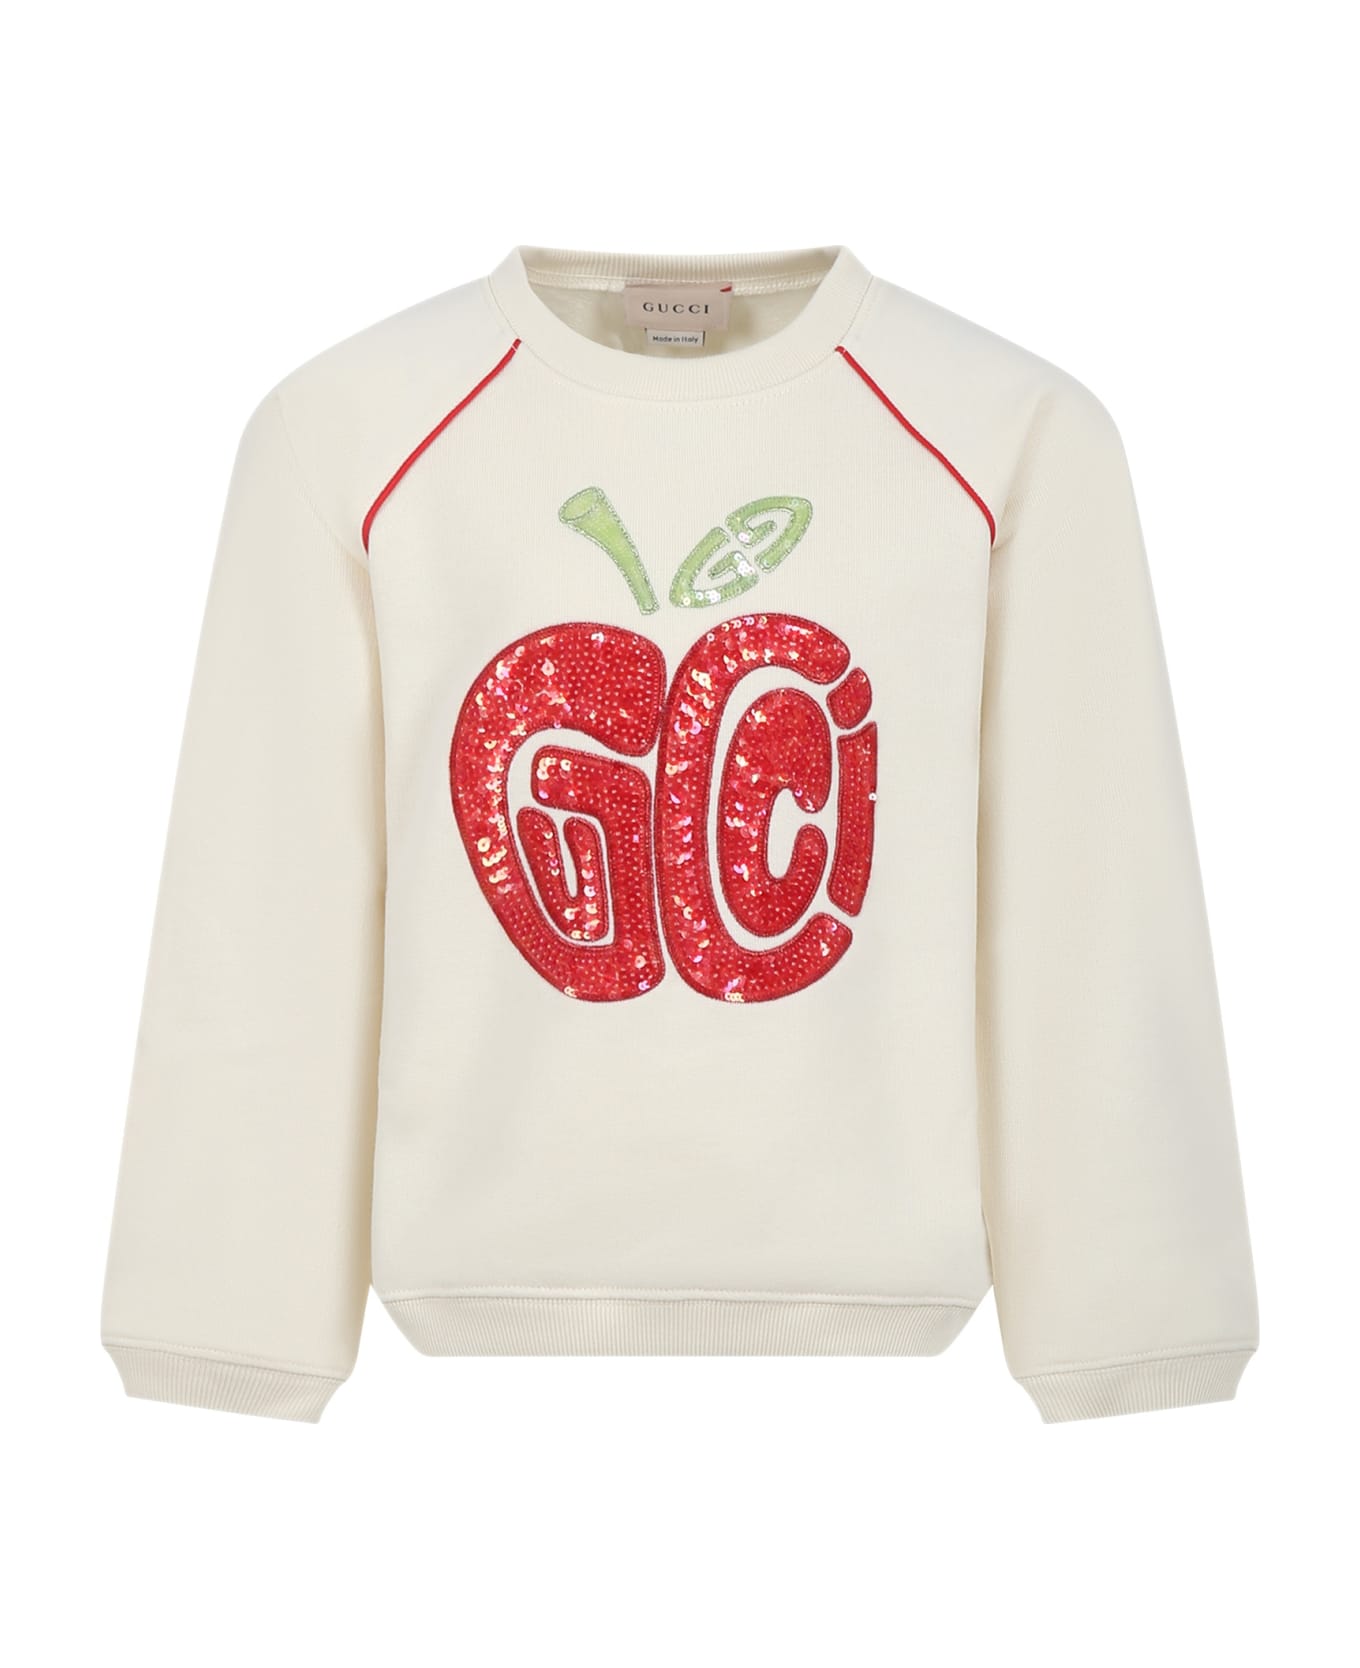 Gucci Ivory Sweatshirt For Girl With Logo - Ivory